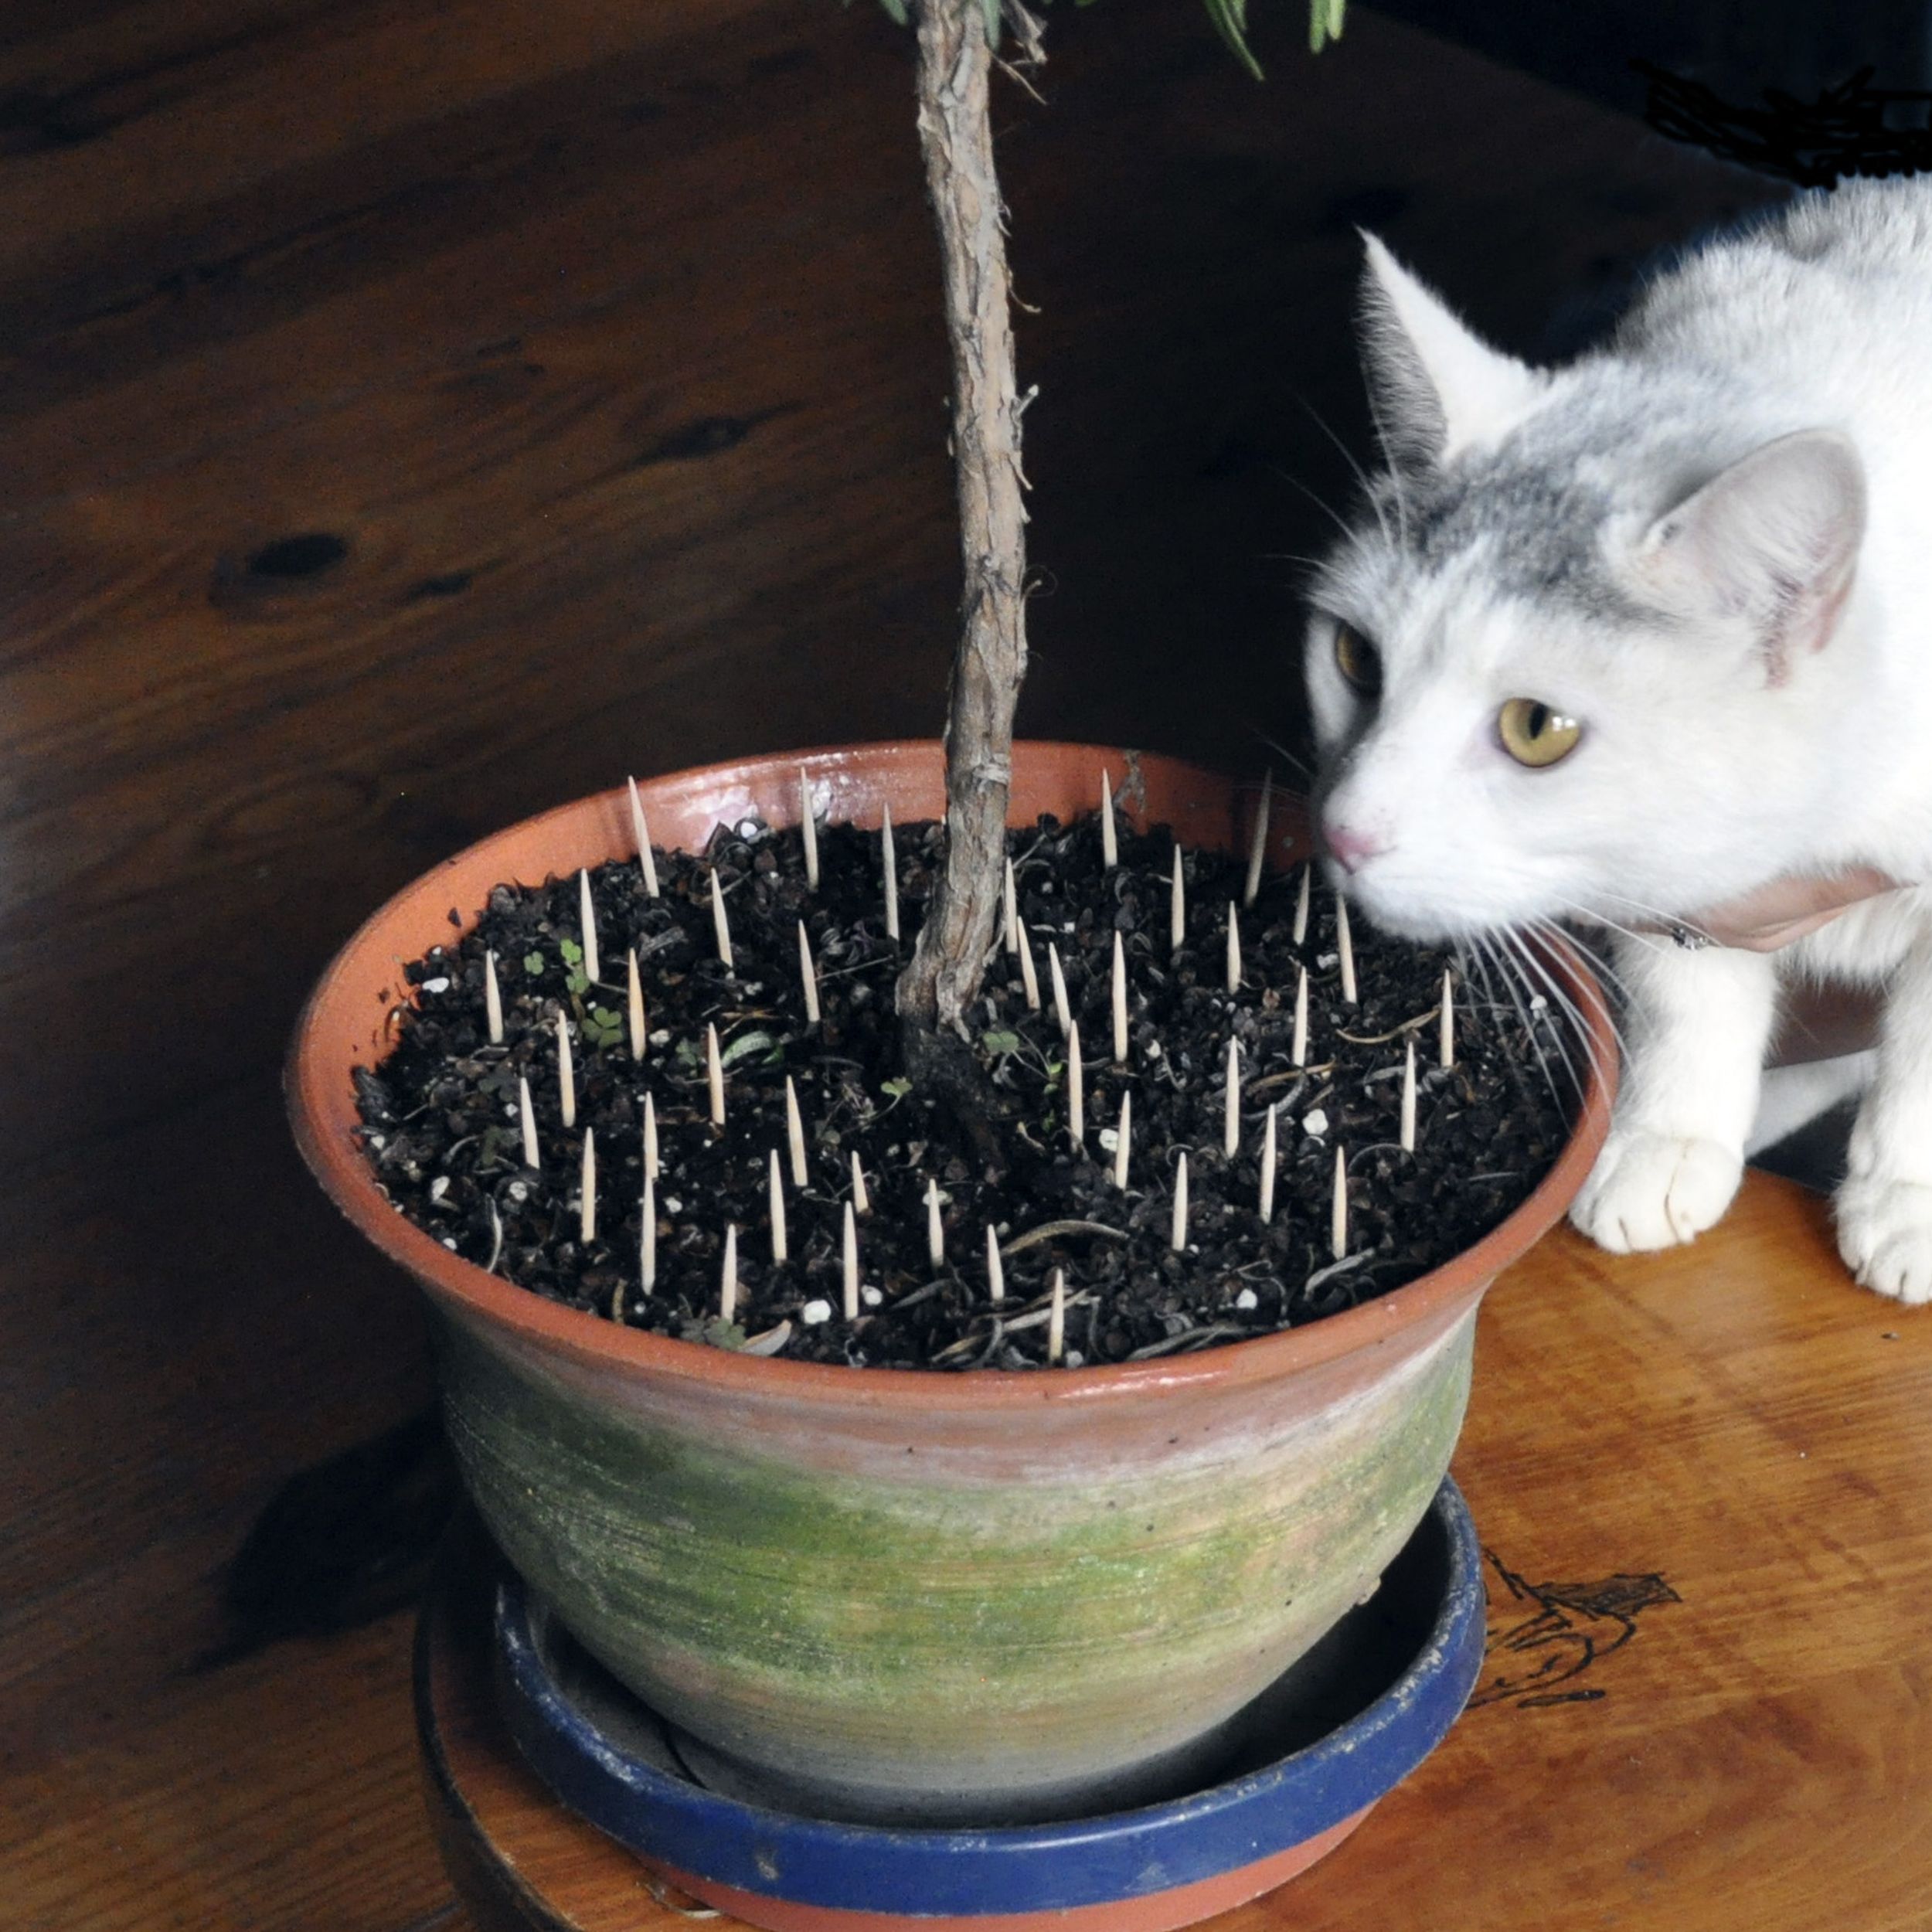 How To Stop Cats From Eating Plants Take care mixing cats, houseplants | The Spokesman-Review